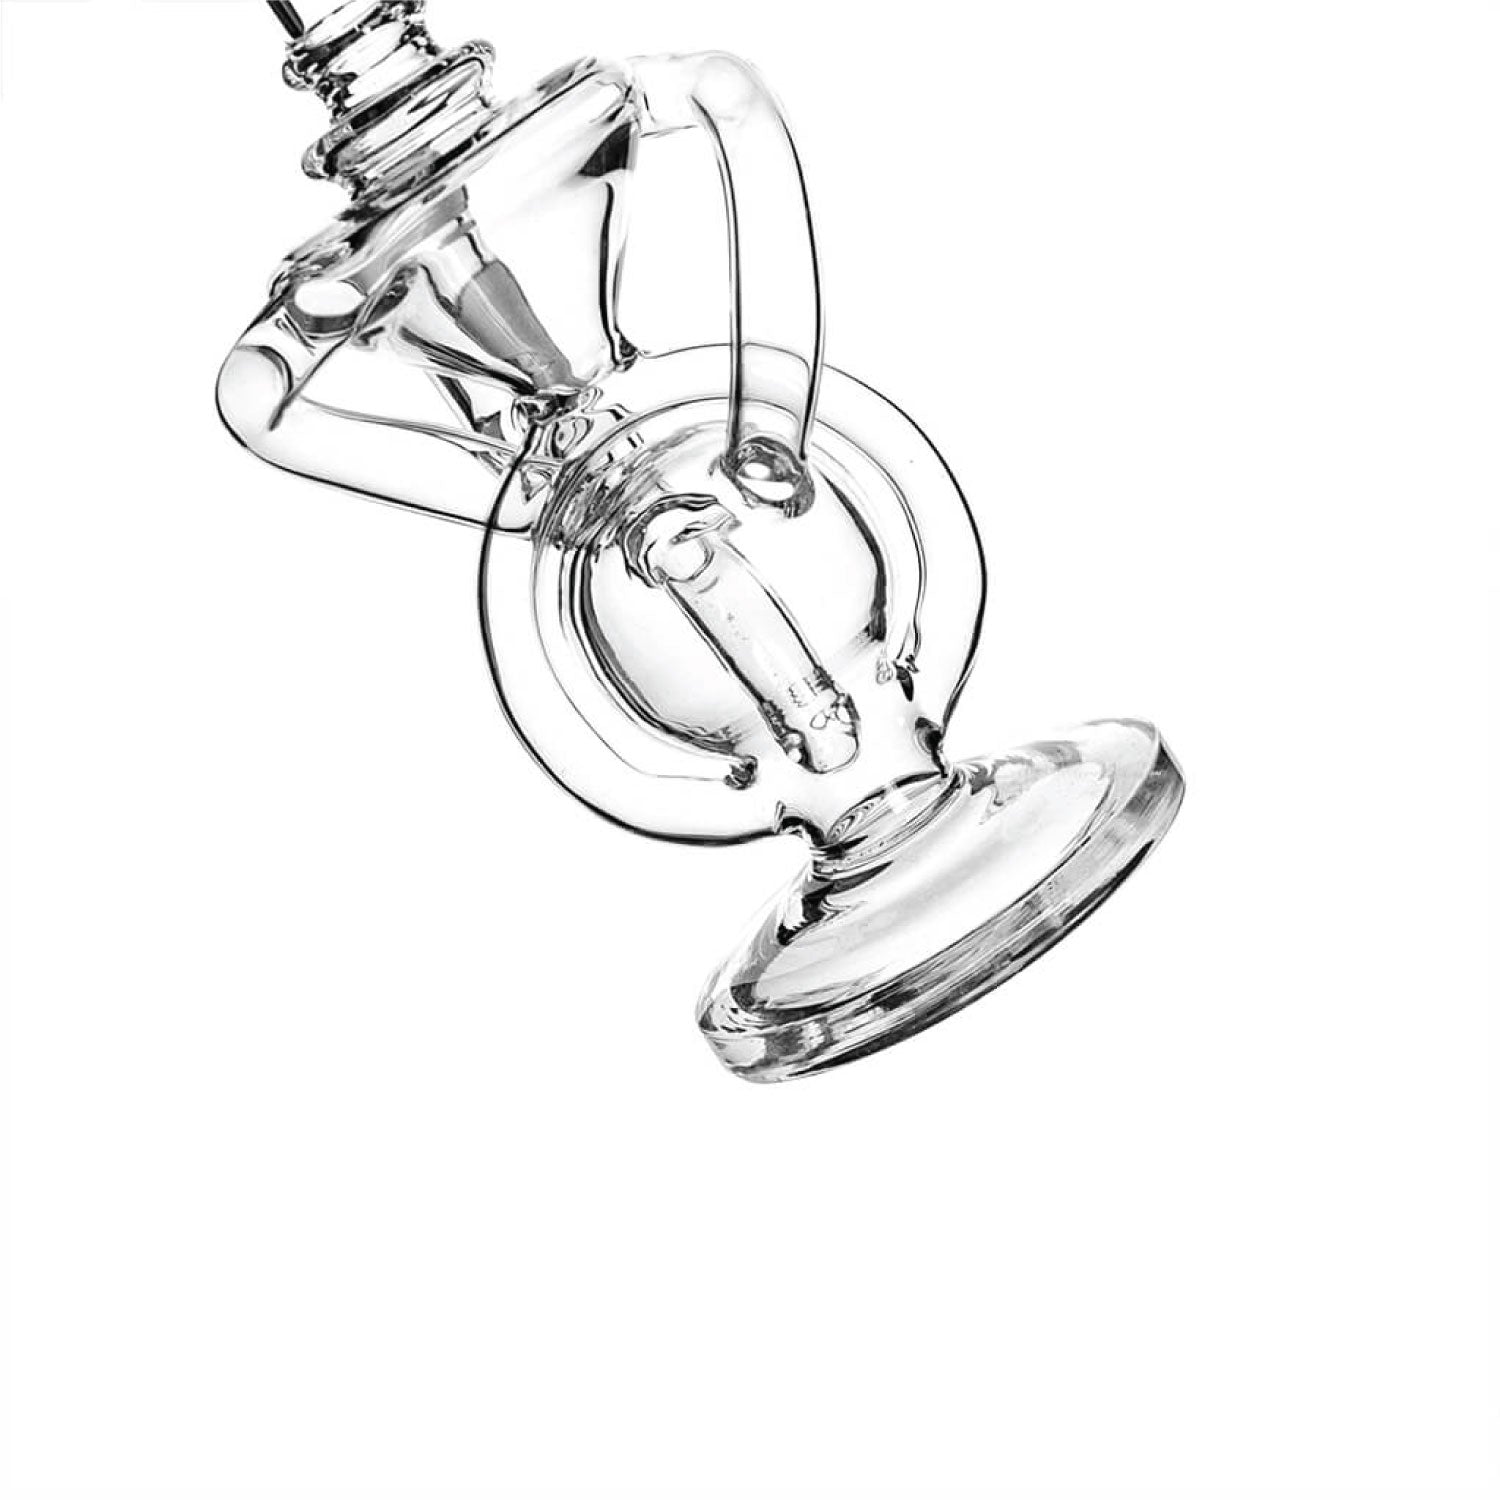 Proof® Twister Recycler